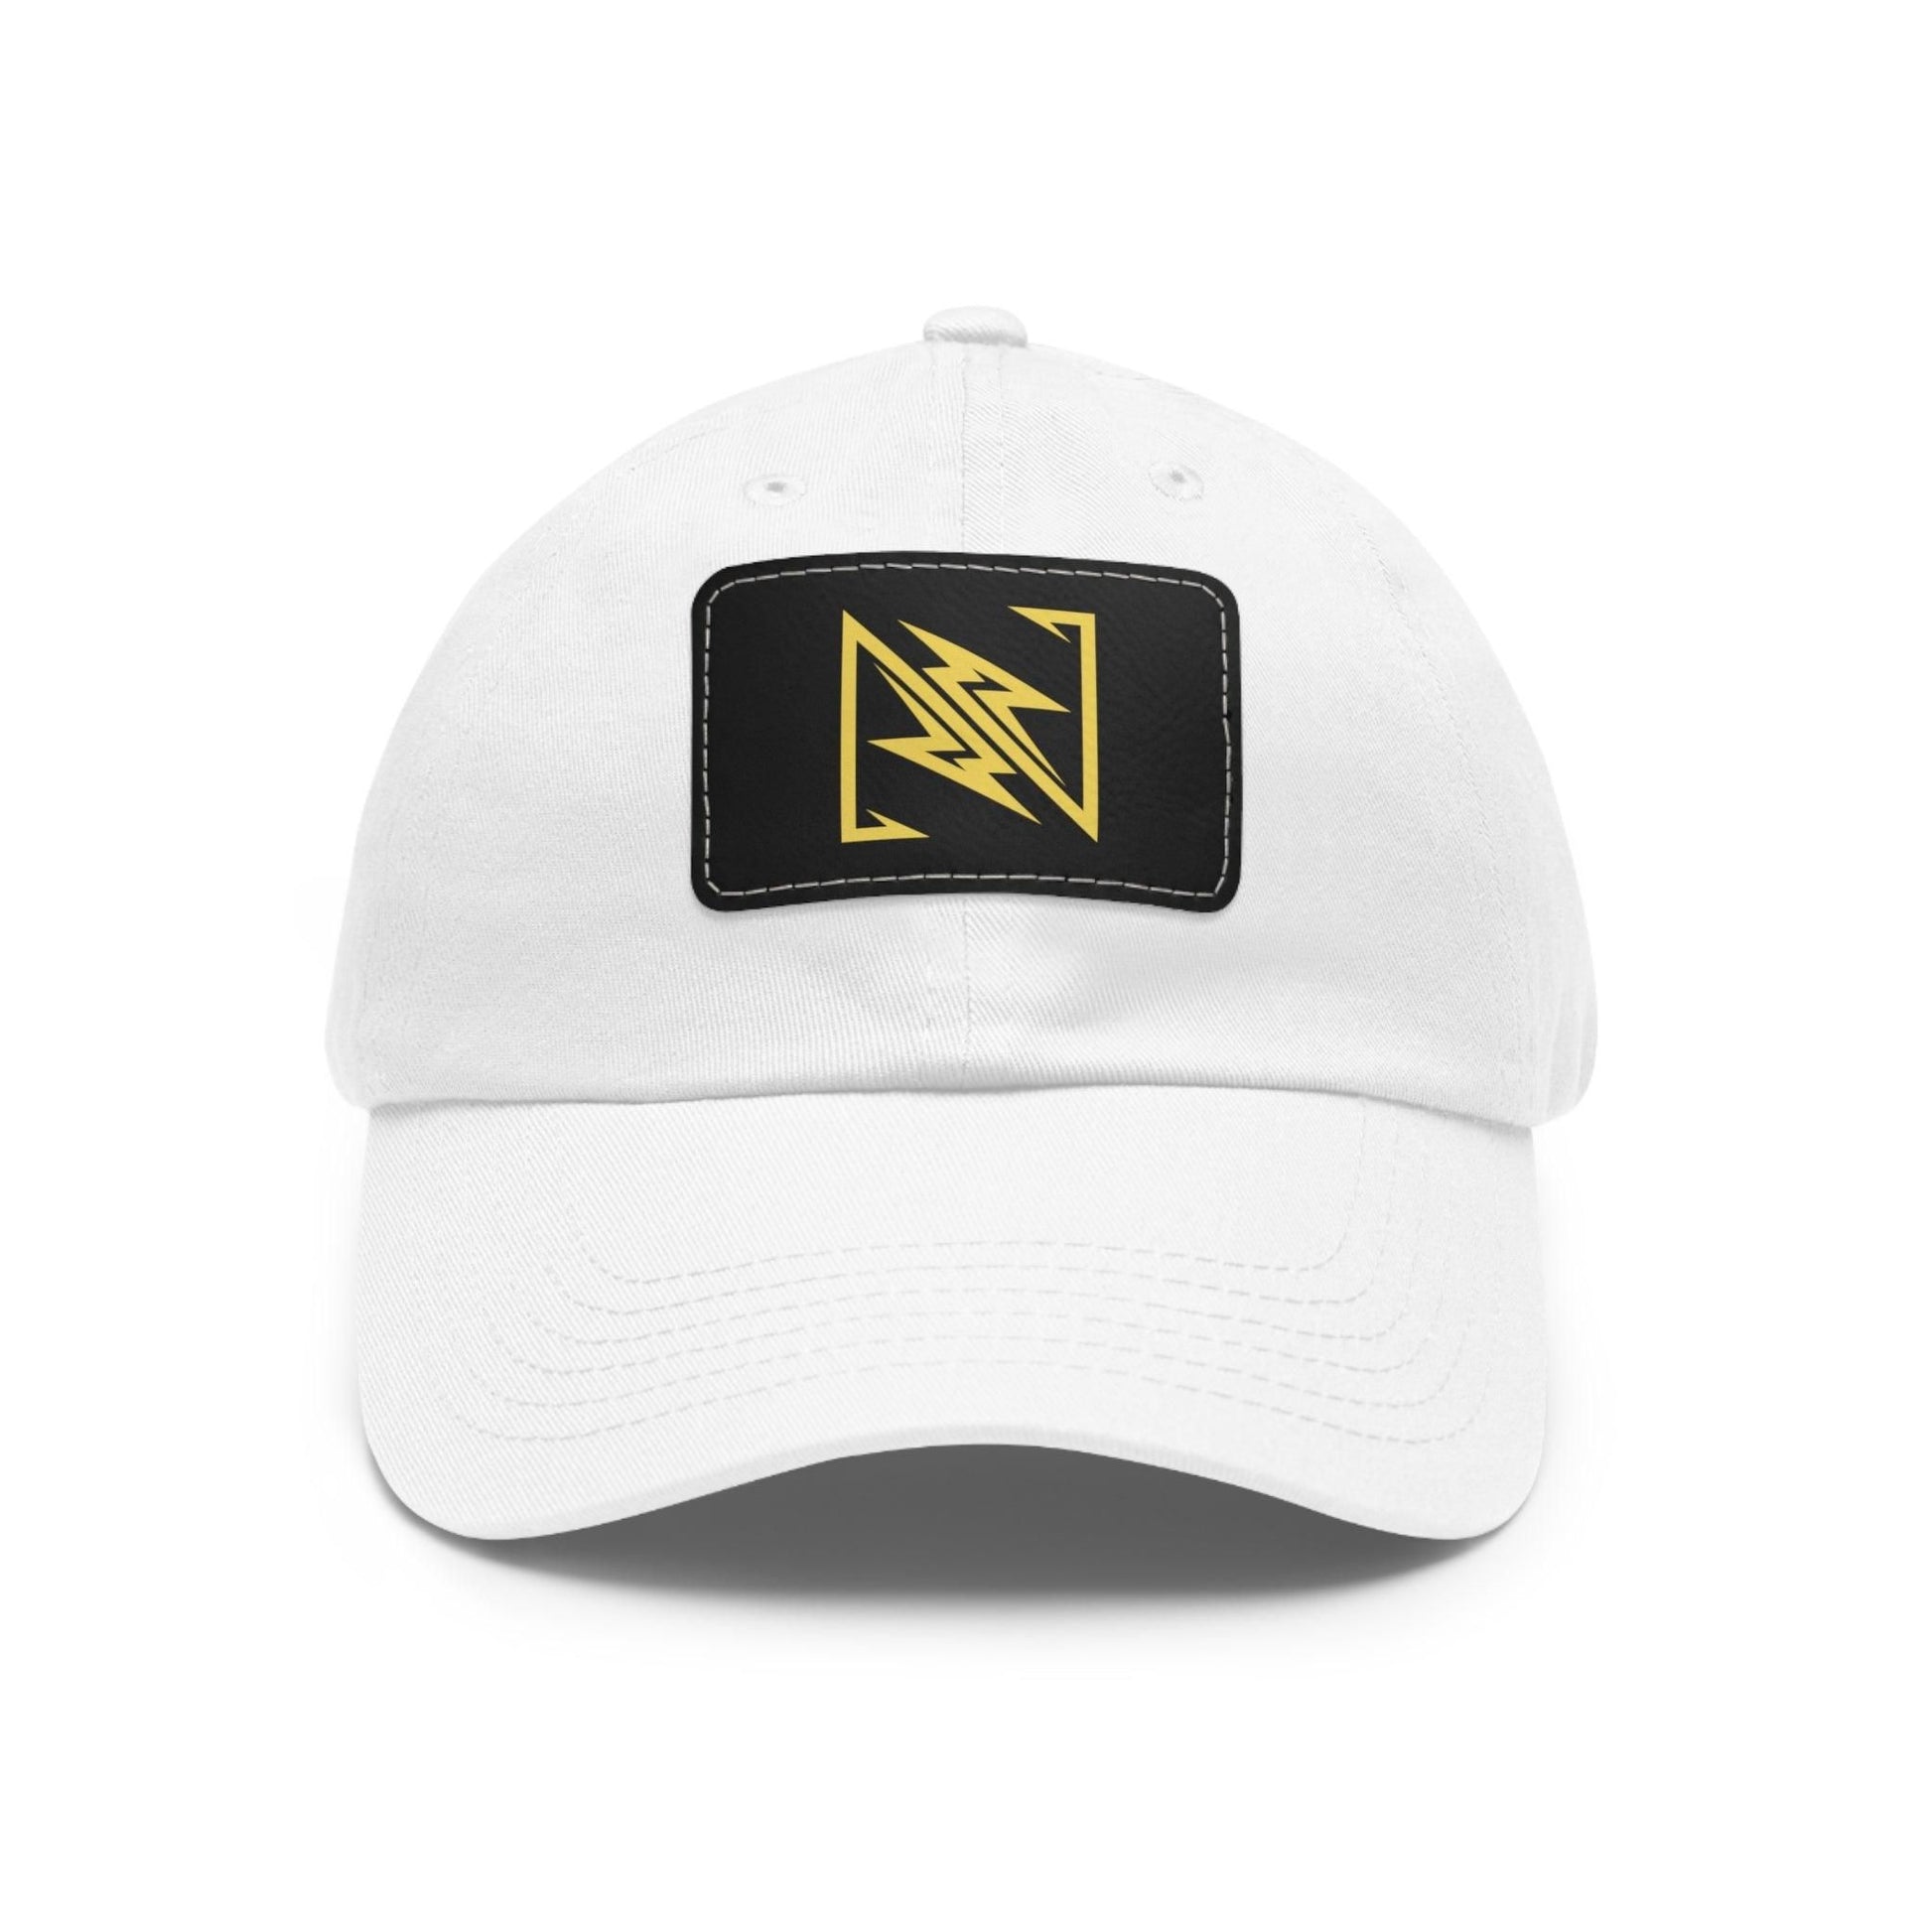 NX Vogue Premium Baseball Hat with Leather Patch Cap White / Black patch Rectangle One size